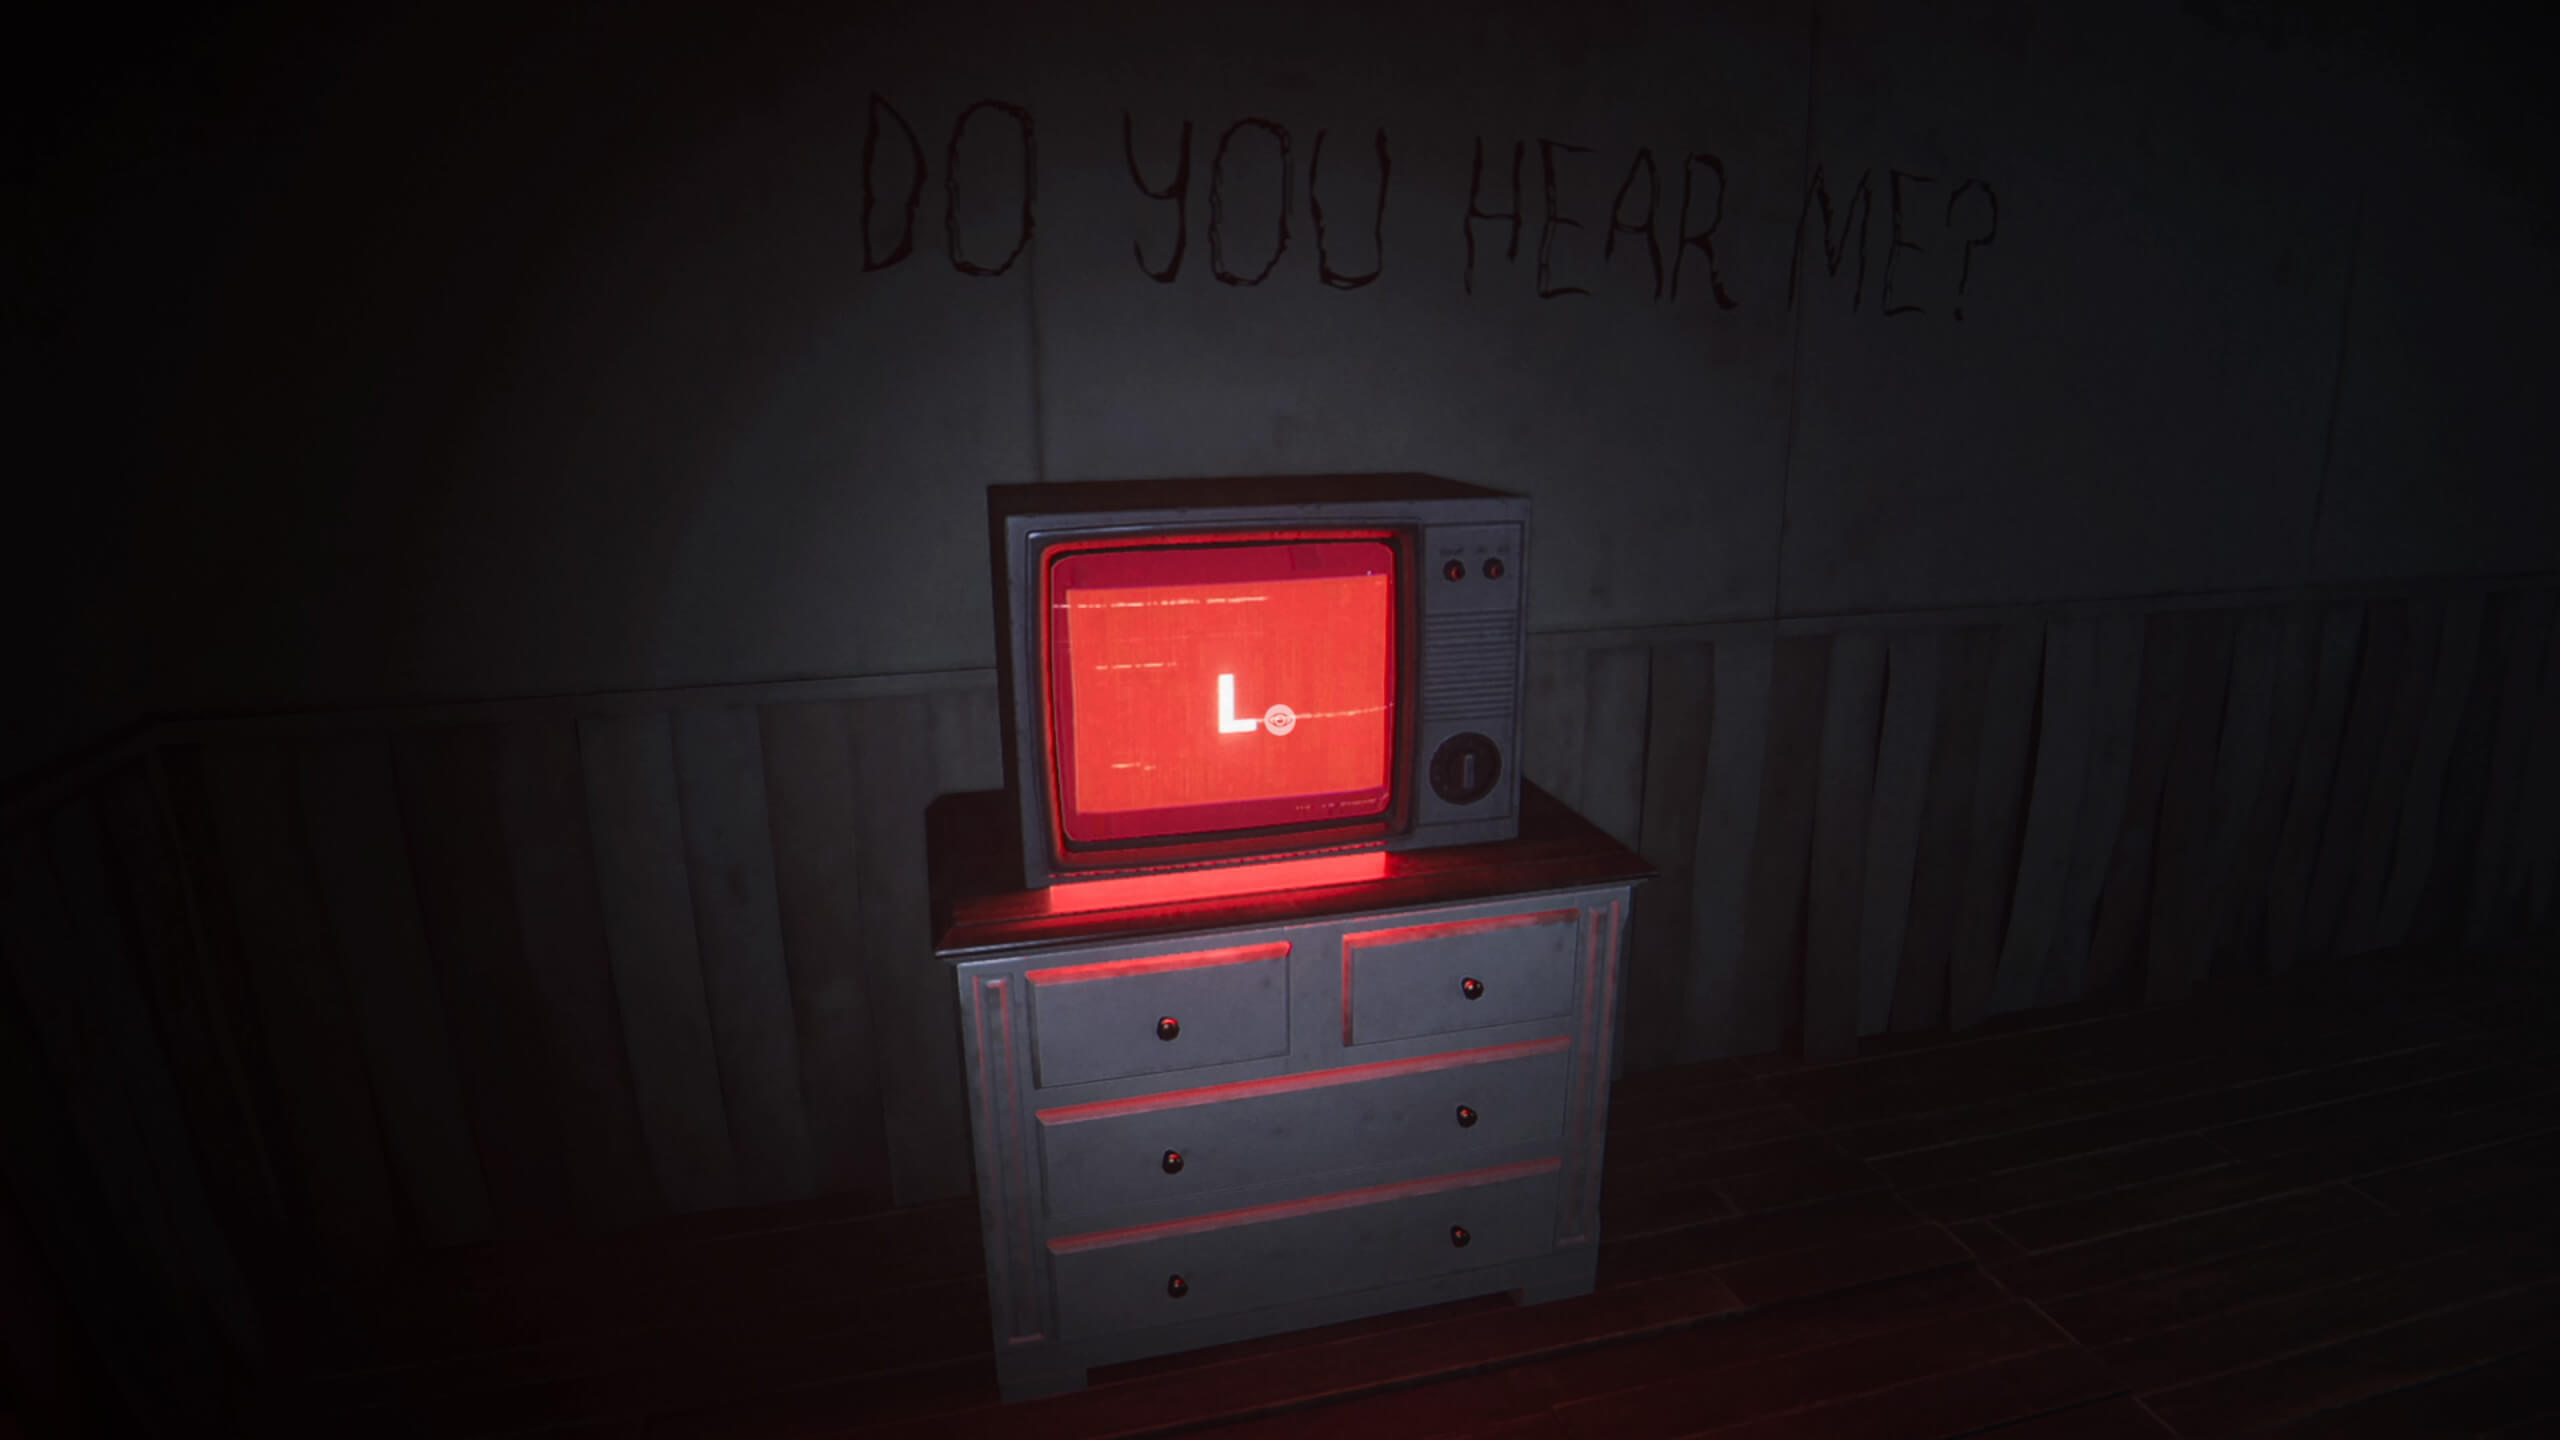 An old box television sat atop a white chest of drawers in a dark room. The TV is glowing red with the letter L on it in white. Behind the TV are the words "DO YOU HEAR ME" scrawled in black on the wall.